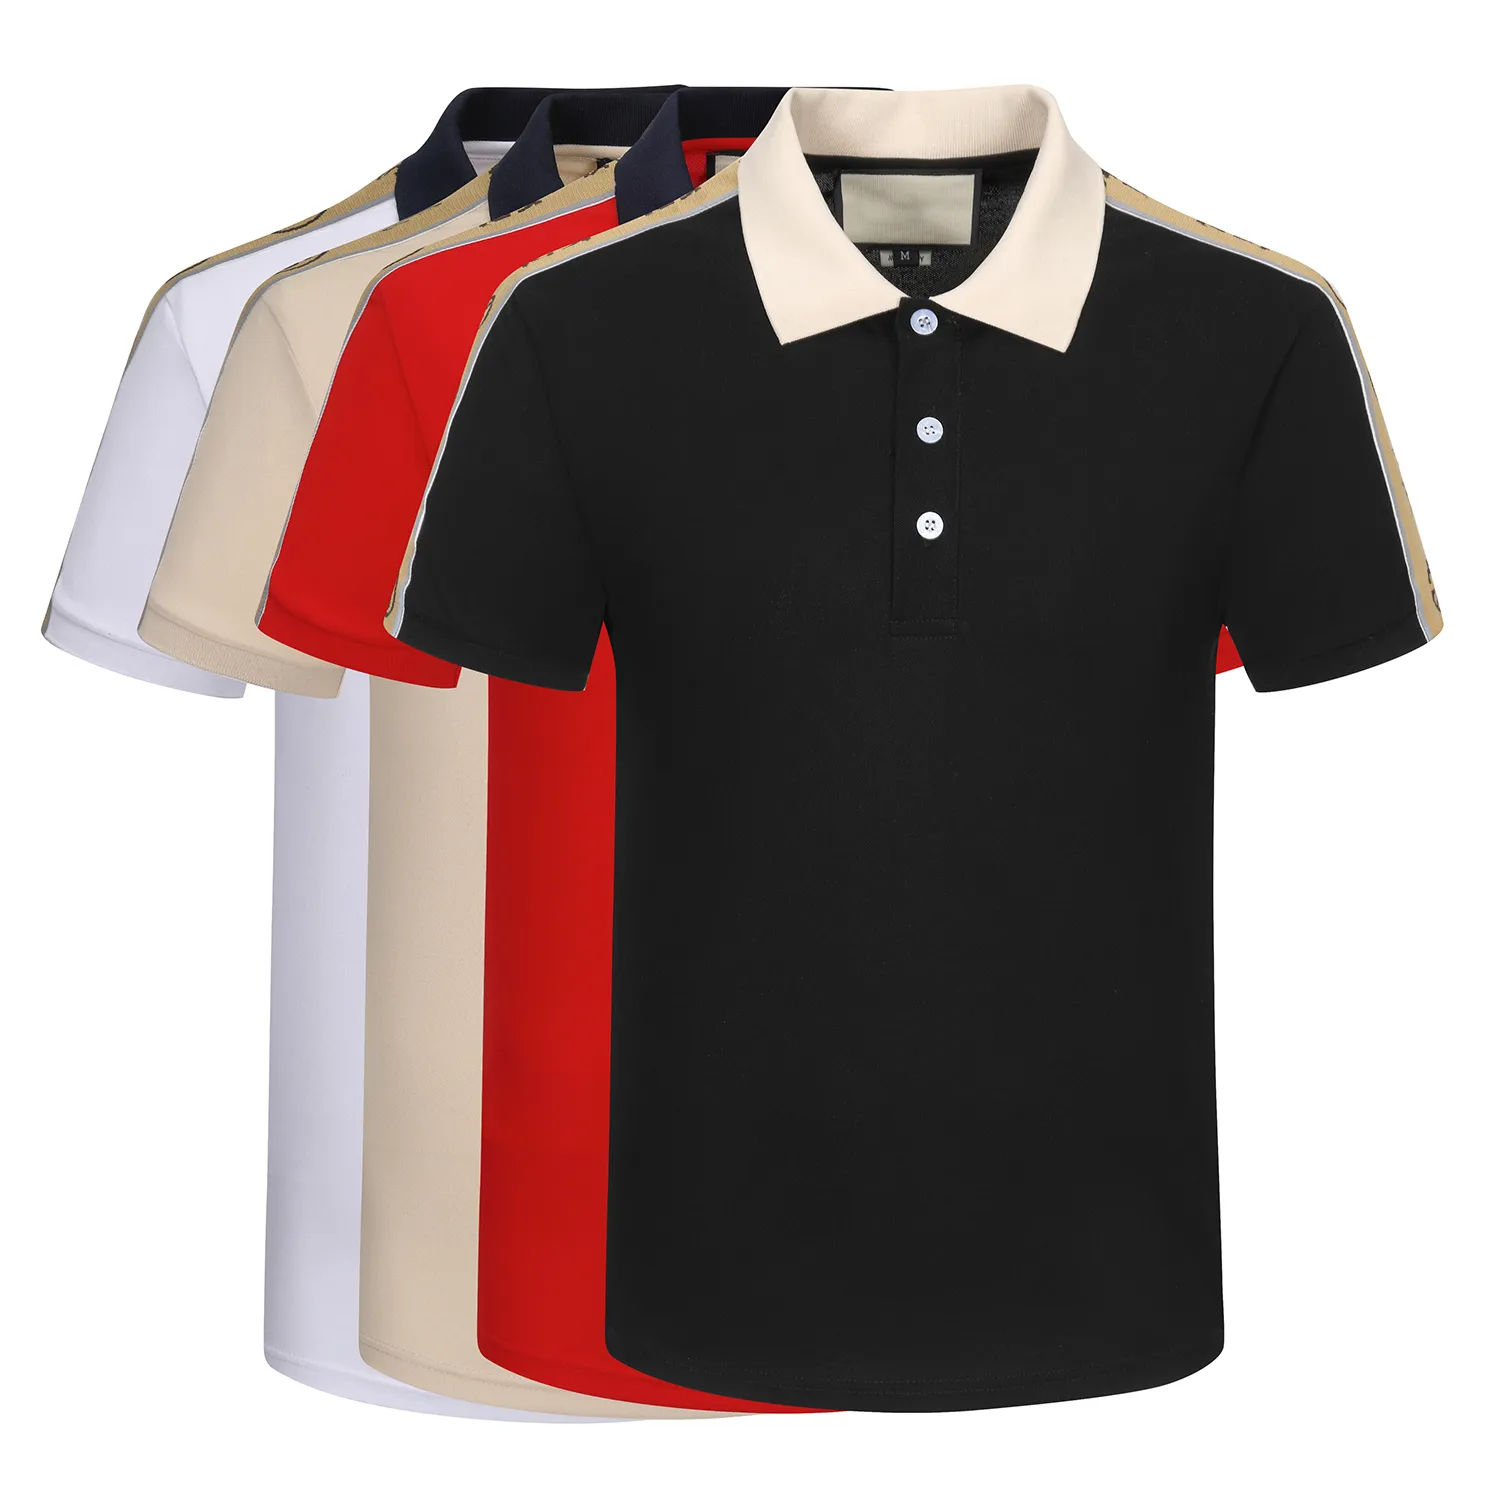 Men's Polo shirt black and white red light luxury short sleeve stitching 100% cotton classic letter Business Casual lapel fashion slim 3XL#98